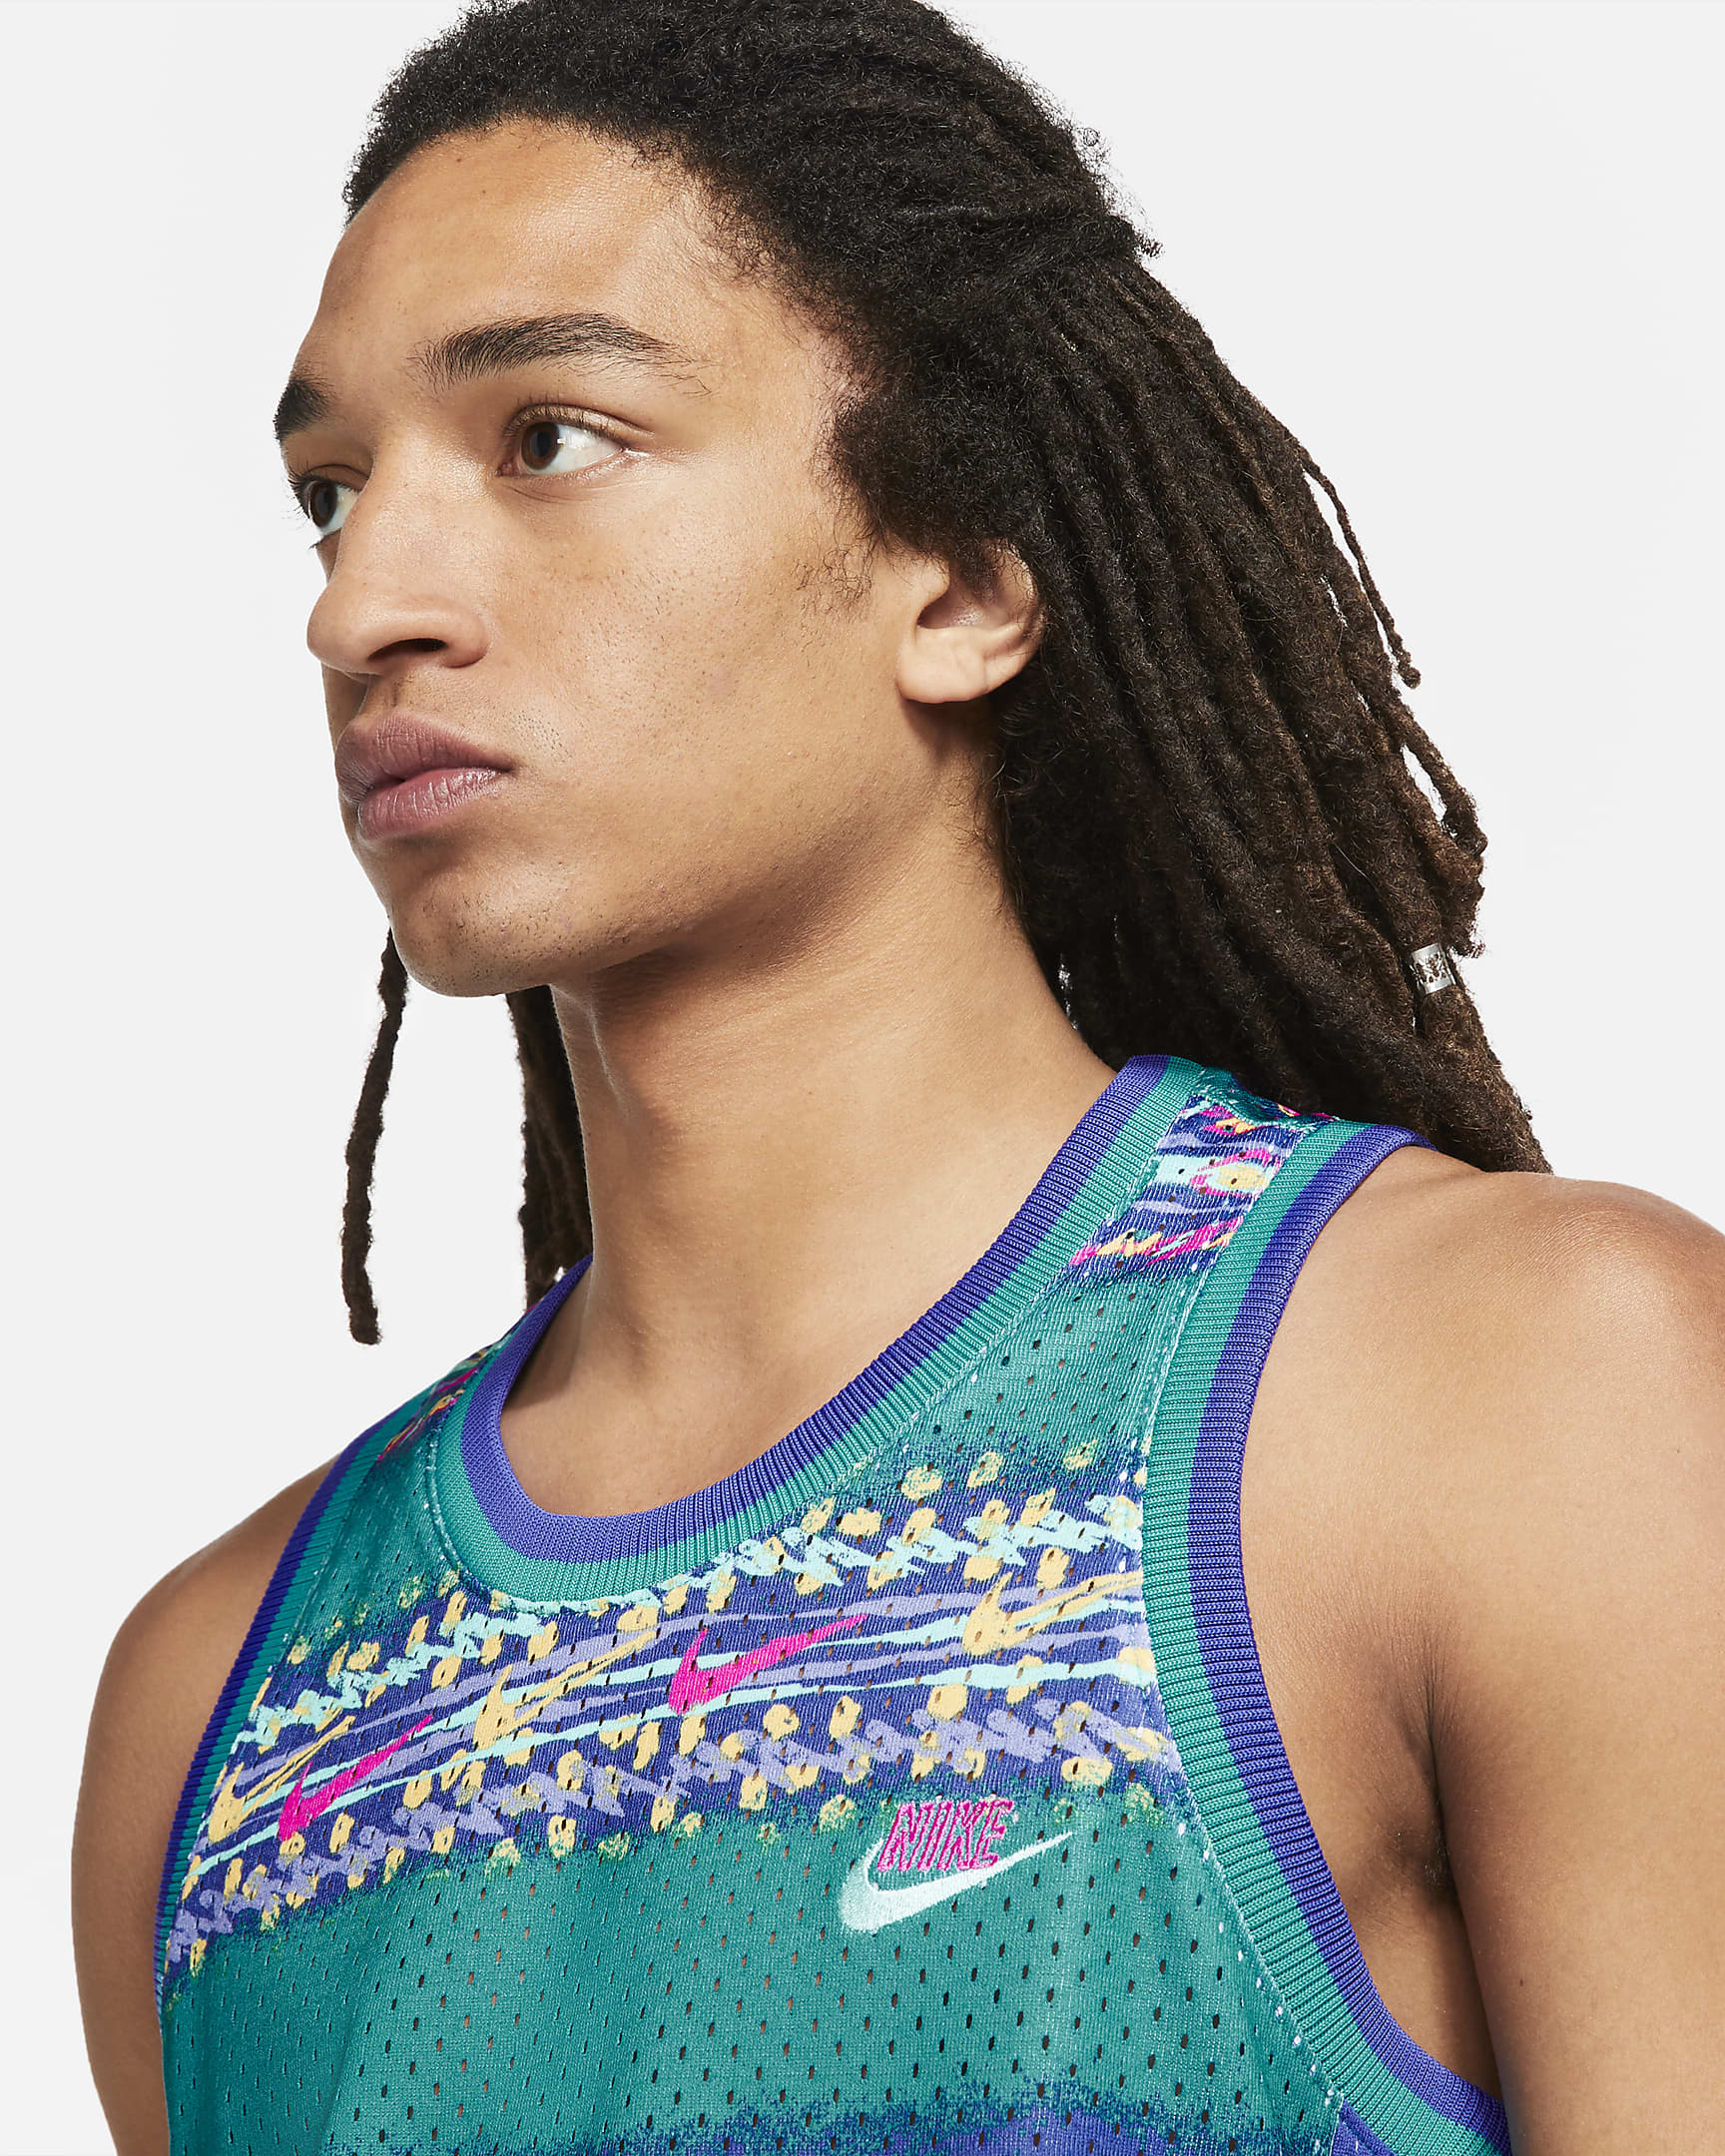 nike-stories-mens-basketball-jersey-G1Cm2c-2.png